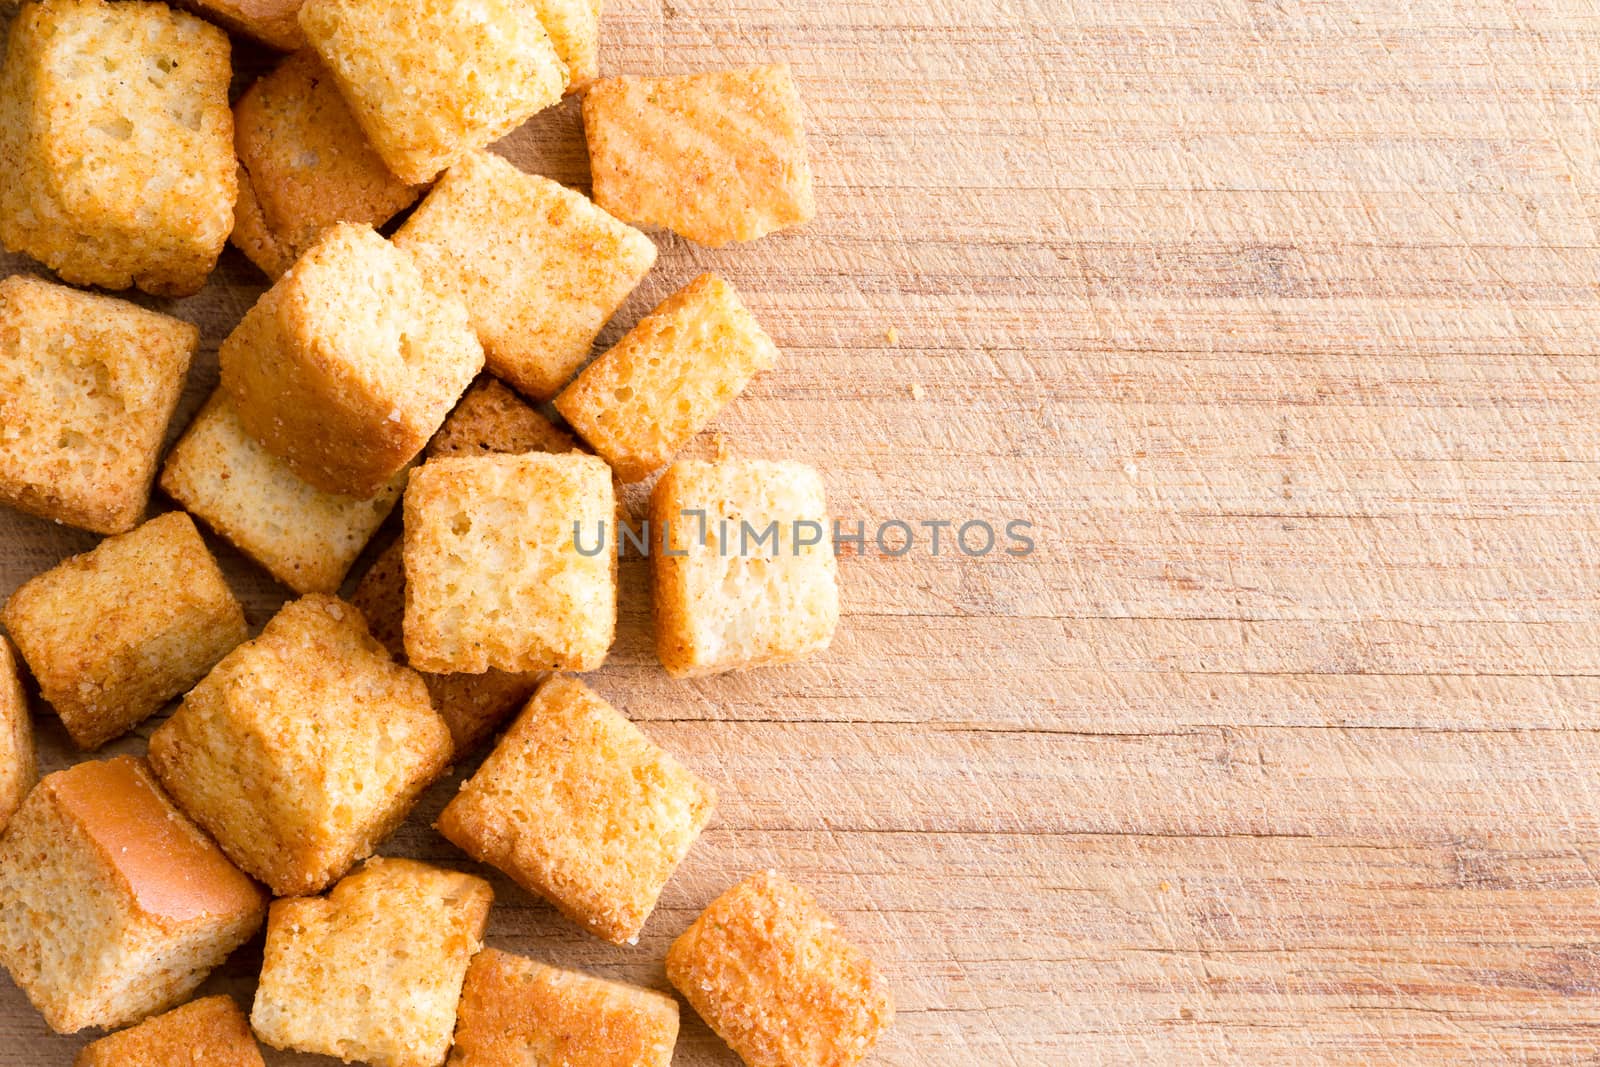 Crispy golden freshly sauteed croutons made of cubed white bread as a delicious crunchy addition to a bowl of hot winter soup, overhead on wood with copy space